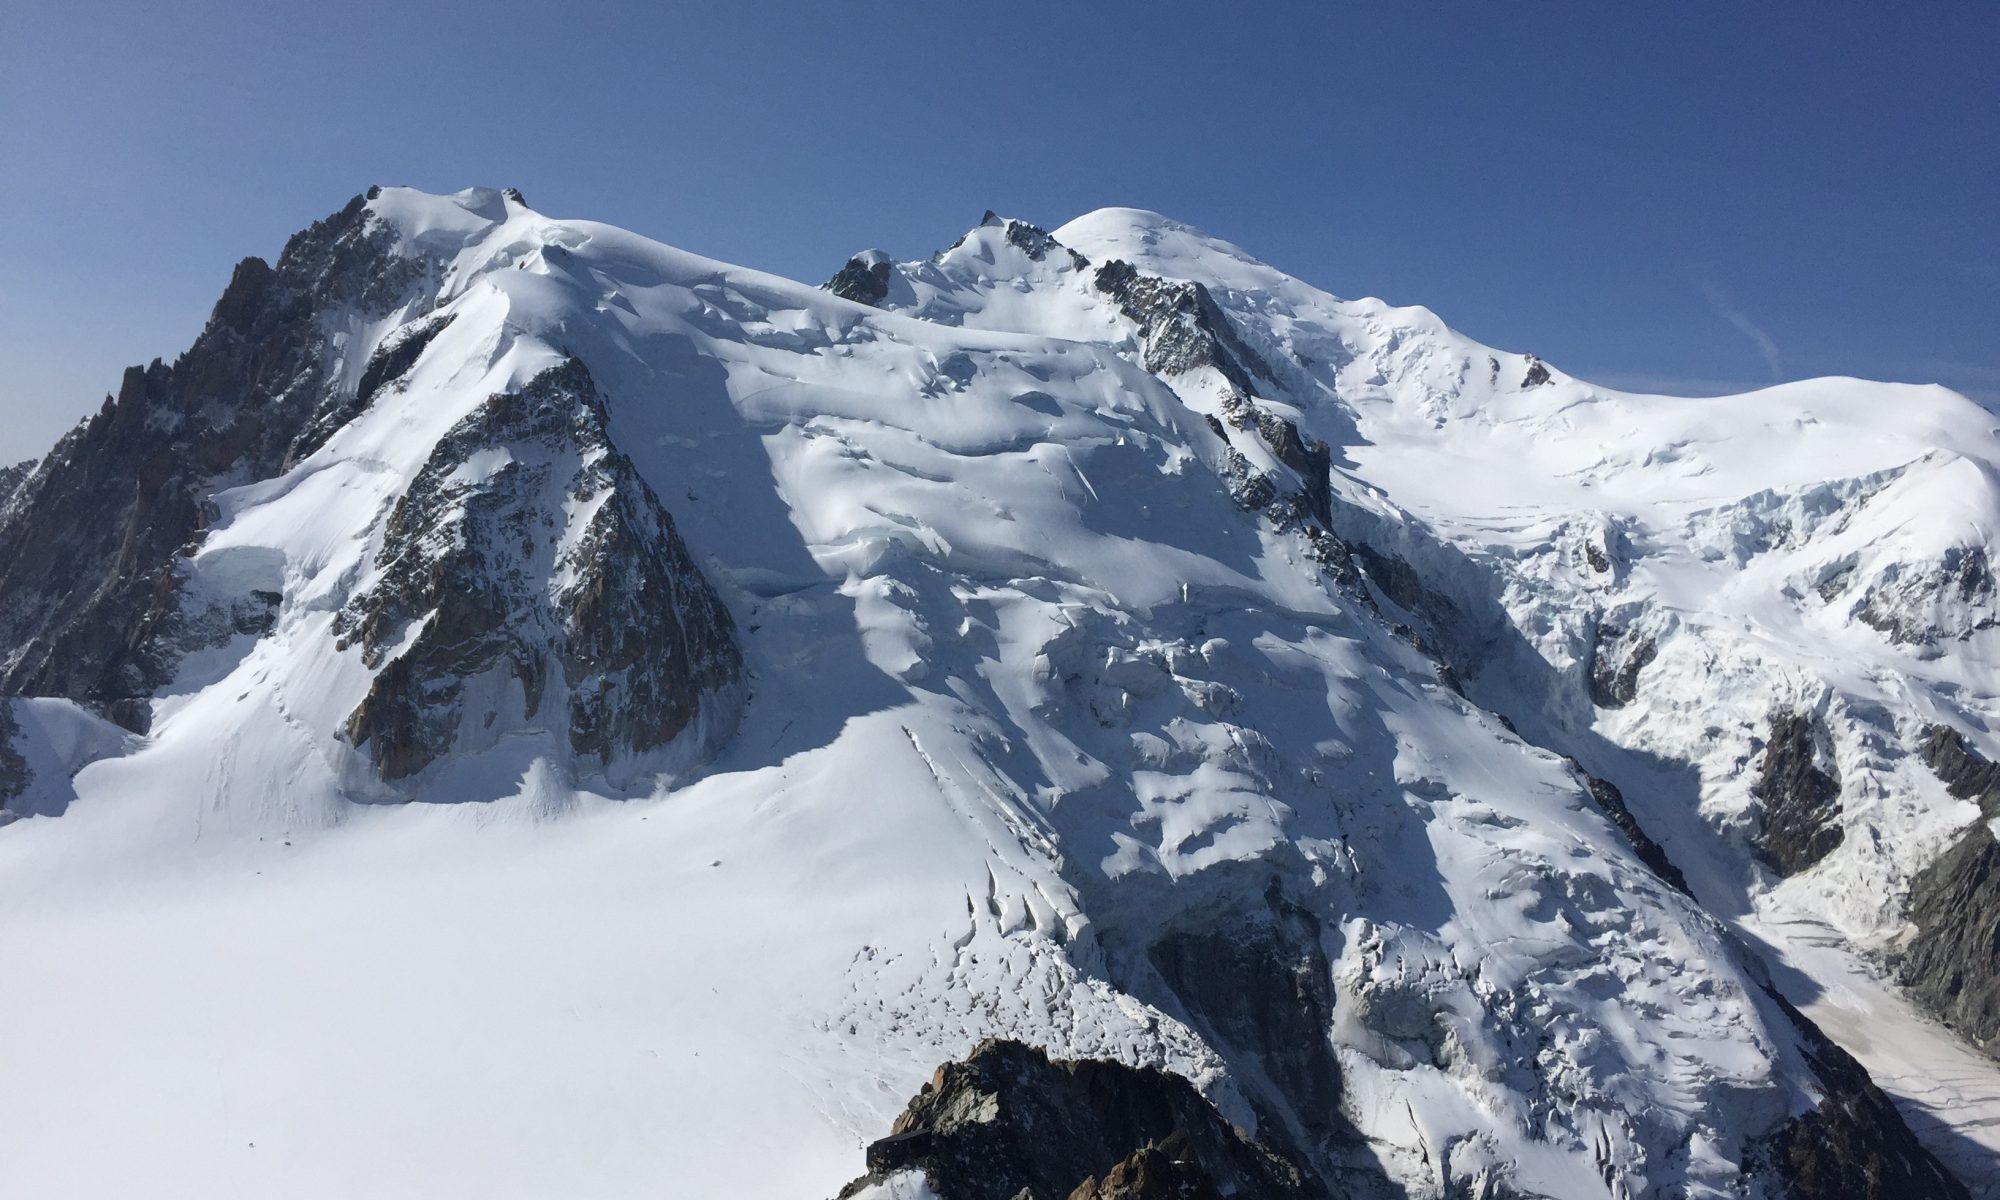 Mont Blanc. Photo: The-Ski-Guru. A Pilot may face punishment after landing on the Mont Blanc.